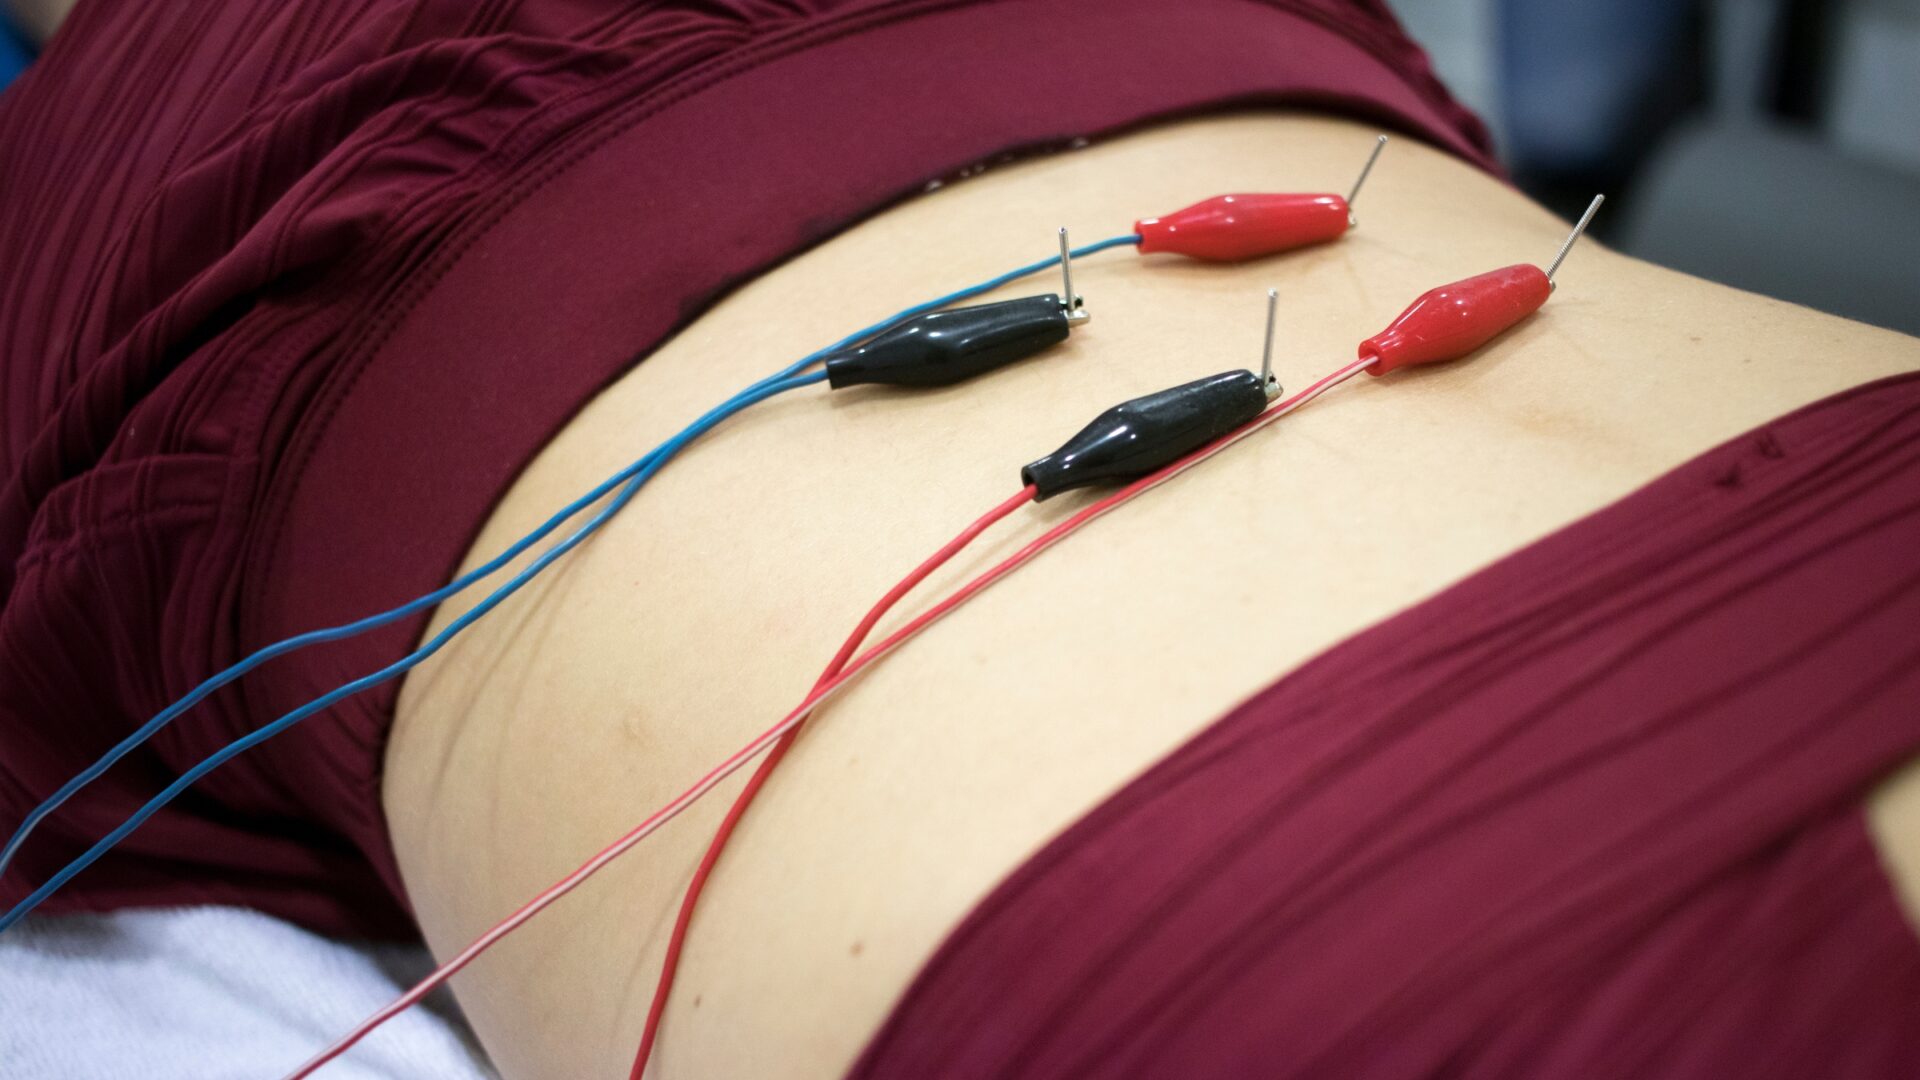 Close up of a person getting dry needling done with electrical stimulation